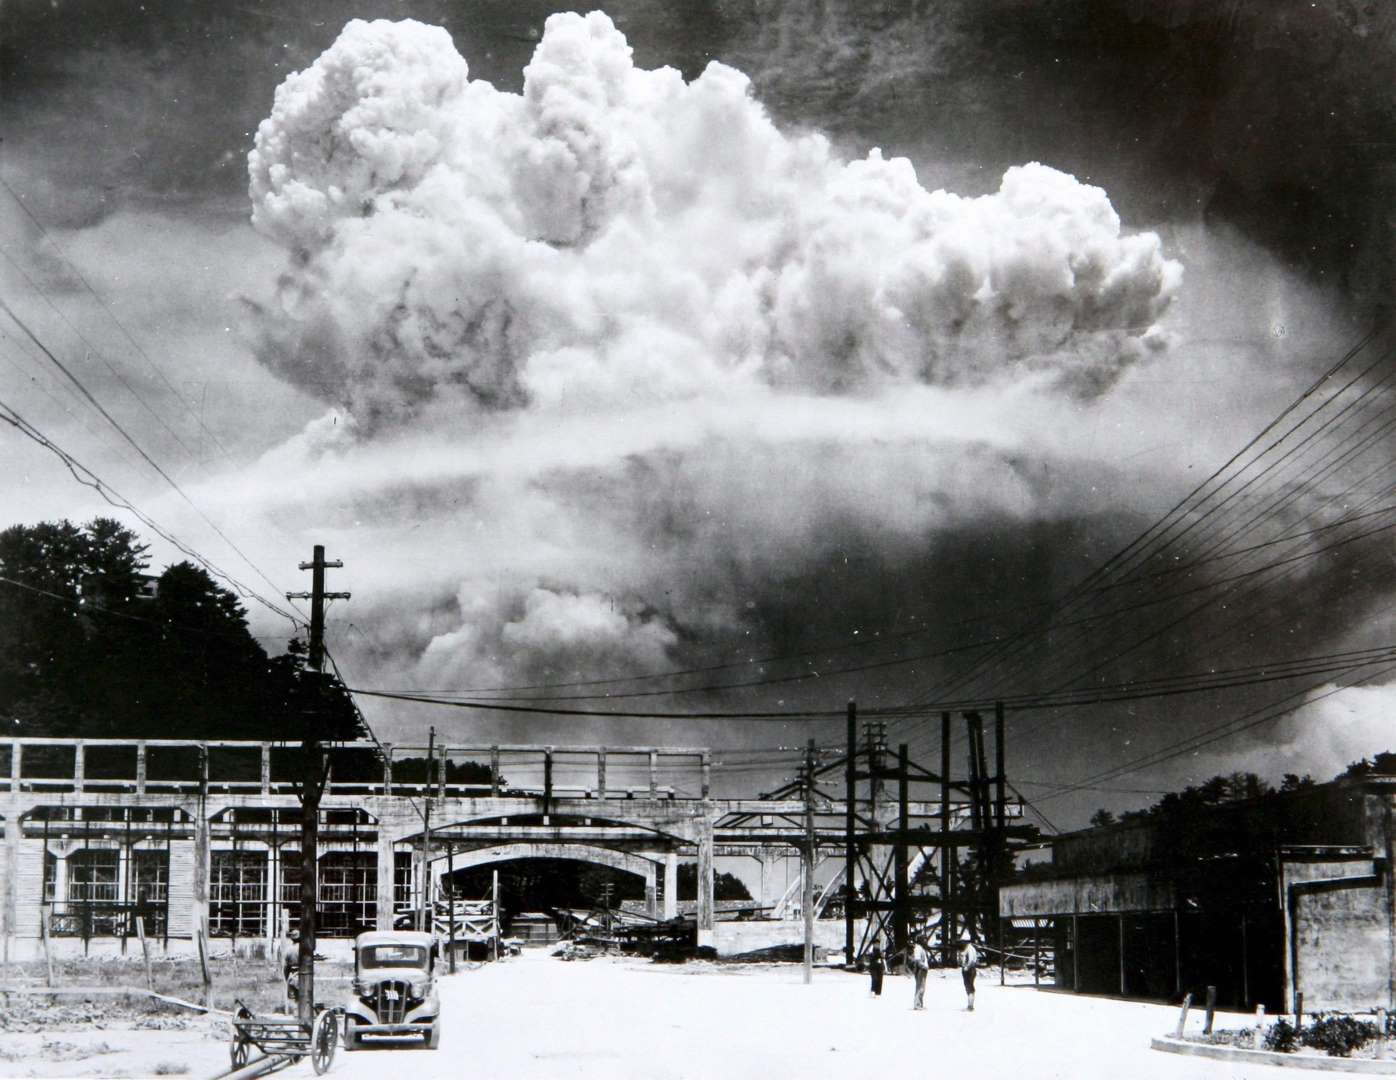 Growing mushroom cloud from the atomic bomb detonation in Nagasaki, Japan, 9 Aug 1945. Note the approaching shock wave that the soldiers in the foreground are apparently not yet aware of.